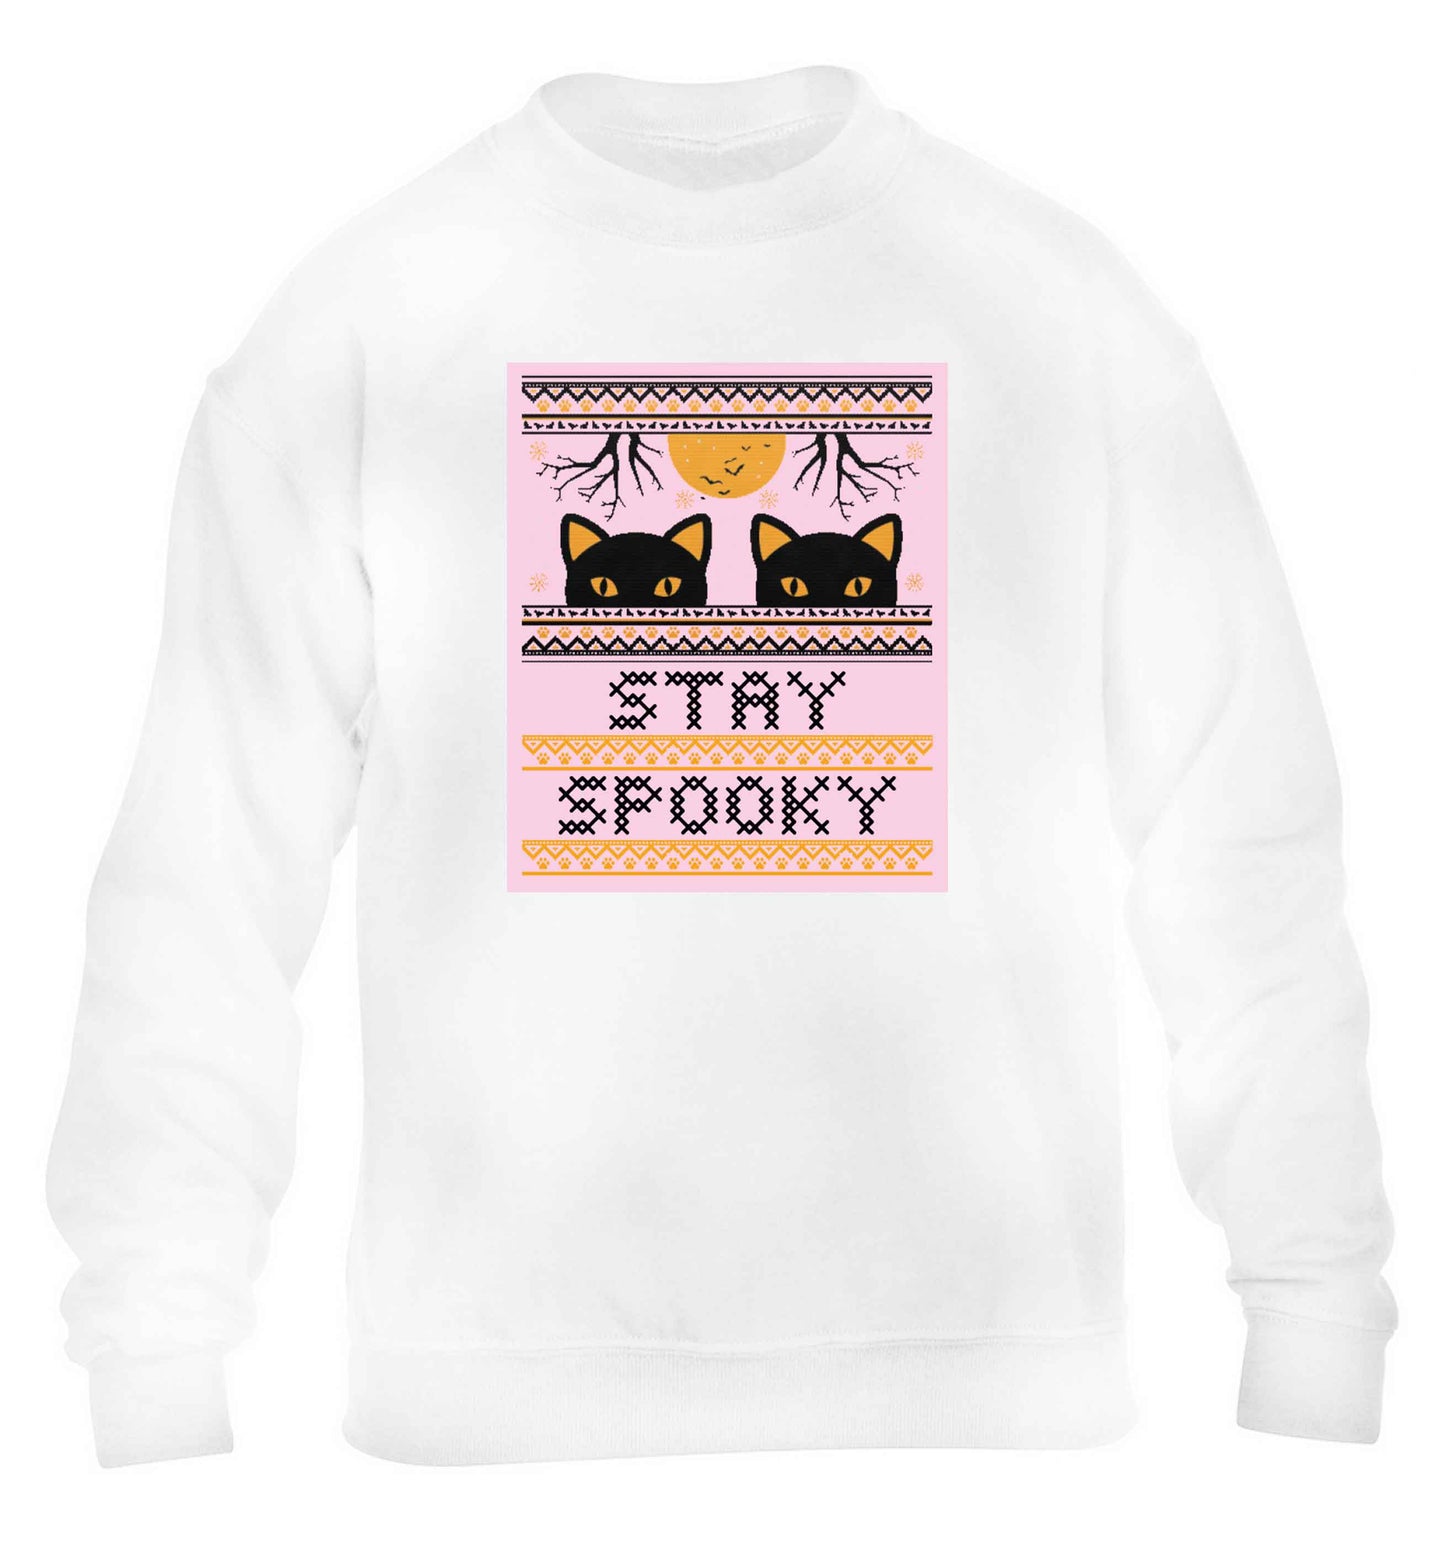 Stay spooky children's white sweater 12-13 Years